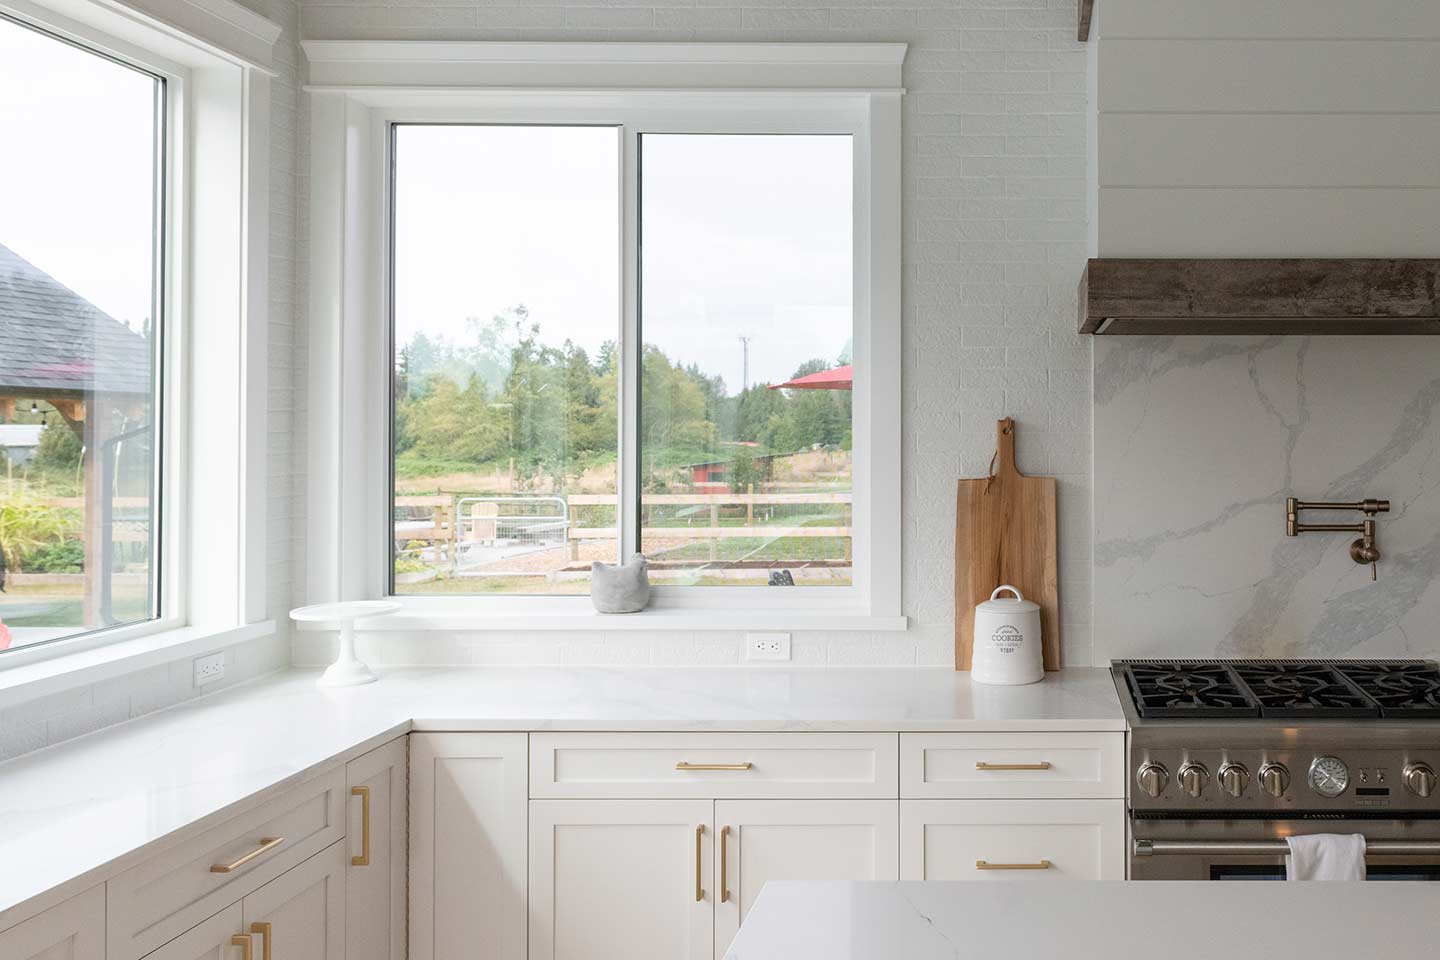 double slider window with two operable sashes above a kitch counter with sink Frame